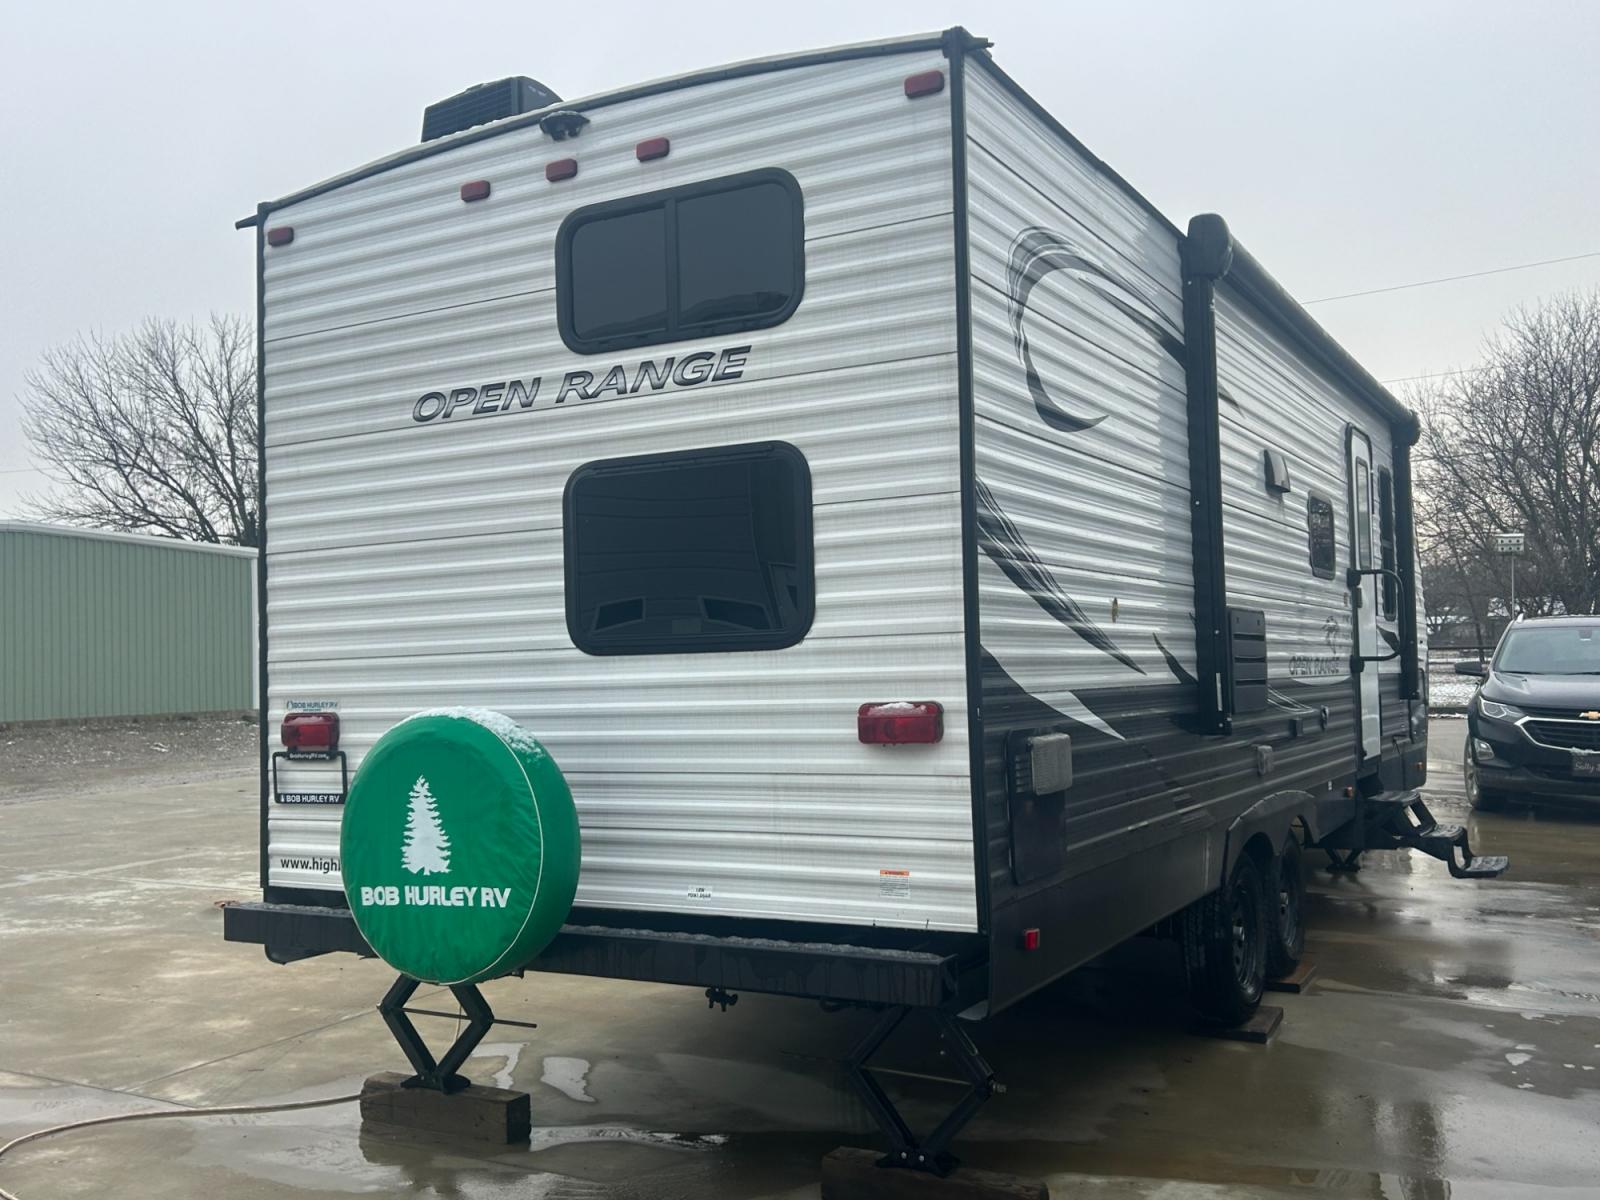 2021 White /TAN Highland Ridge RV, Inc OPEN RANGE 26BHS (58TBH0BP7M1) , located at 17760 Hwy 62, Morris, OK, 74445, 35.609104, -95.877060 - 2021 HIGHLAND RIDGE OPEN RANGE IS PERFECT FOR A SMALL FAMILY OR A LARGE. THIS CAMPER IS 30.5FT LONG AND WILL SLEEP 10 PEOPLE. FEATURES A 16FT POWER AWNING, OUTSIDE STORAGE, DOUBLE AXEL, SINGLE SLIDE OUT, POWER HITCH, AND MANUAL JACKS. IN THE FRONT OF THIS CAMPER IS A QUEEN SIZED BED WITH OVERHEAD ST - Photo #3